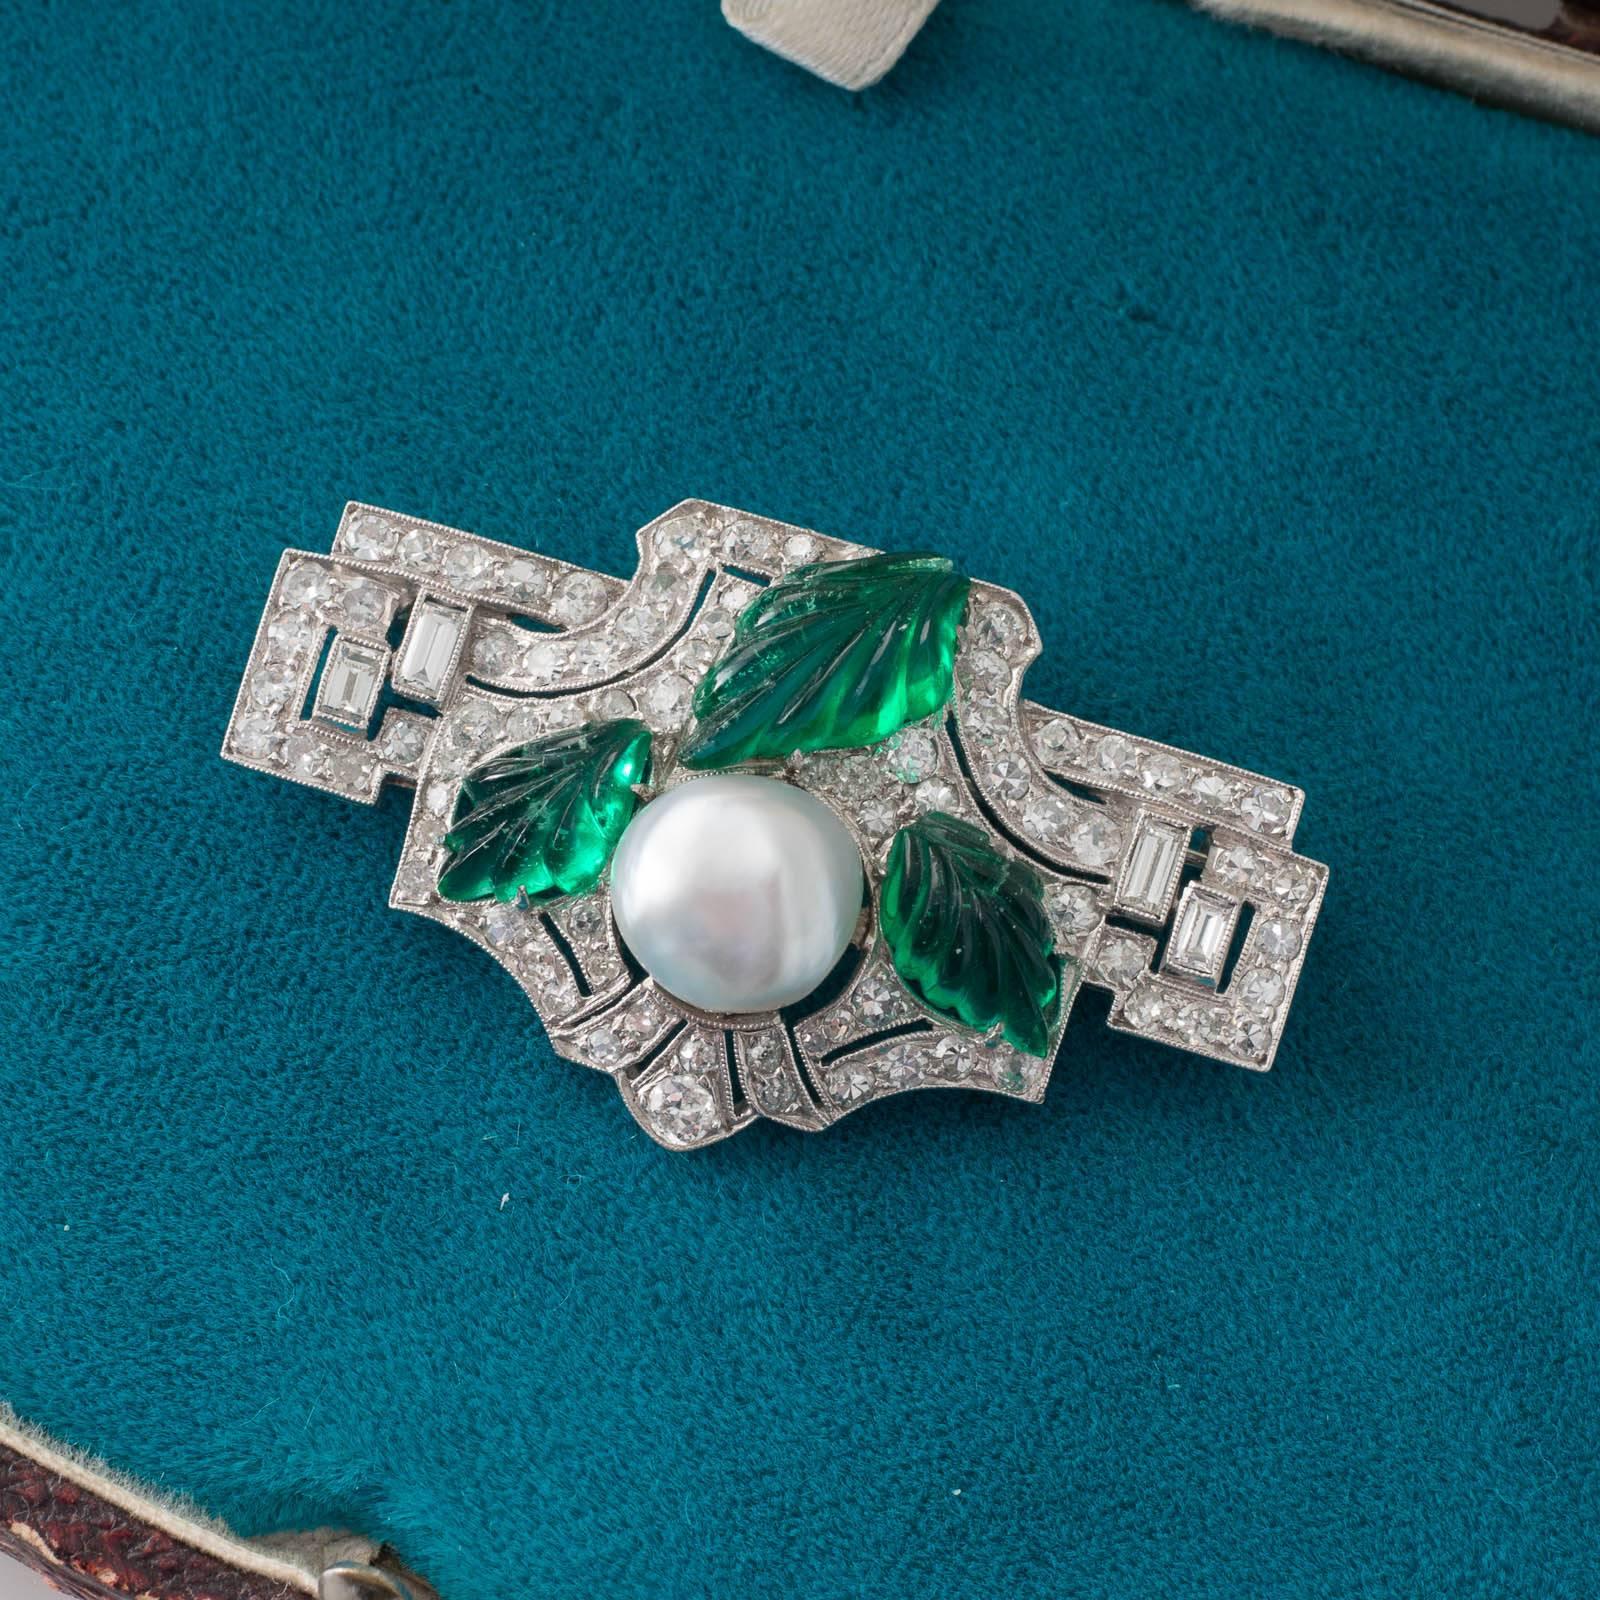 An Art Deco platinum brooch featuring a 4.49ct button shaped natural pearl set within a pierced and diamond set plaque with three large emeralds carved into the shape of leaves arranged around it with a pin roller catch and jump ring to the reverse.